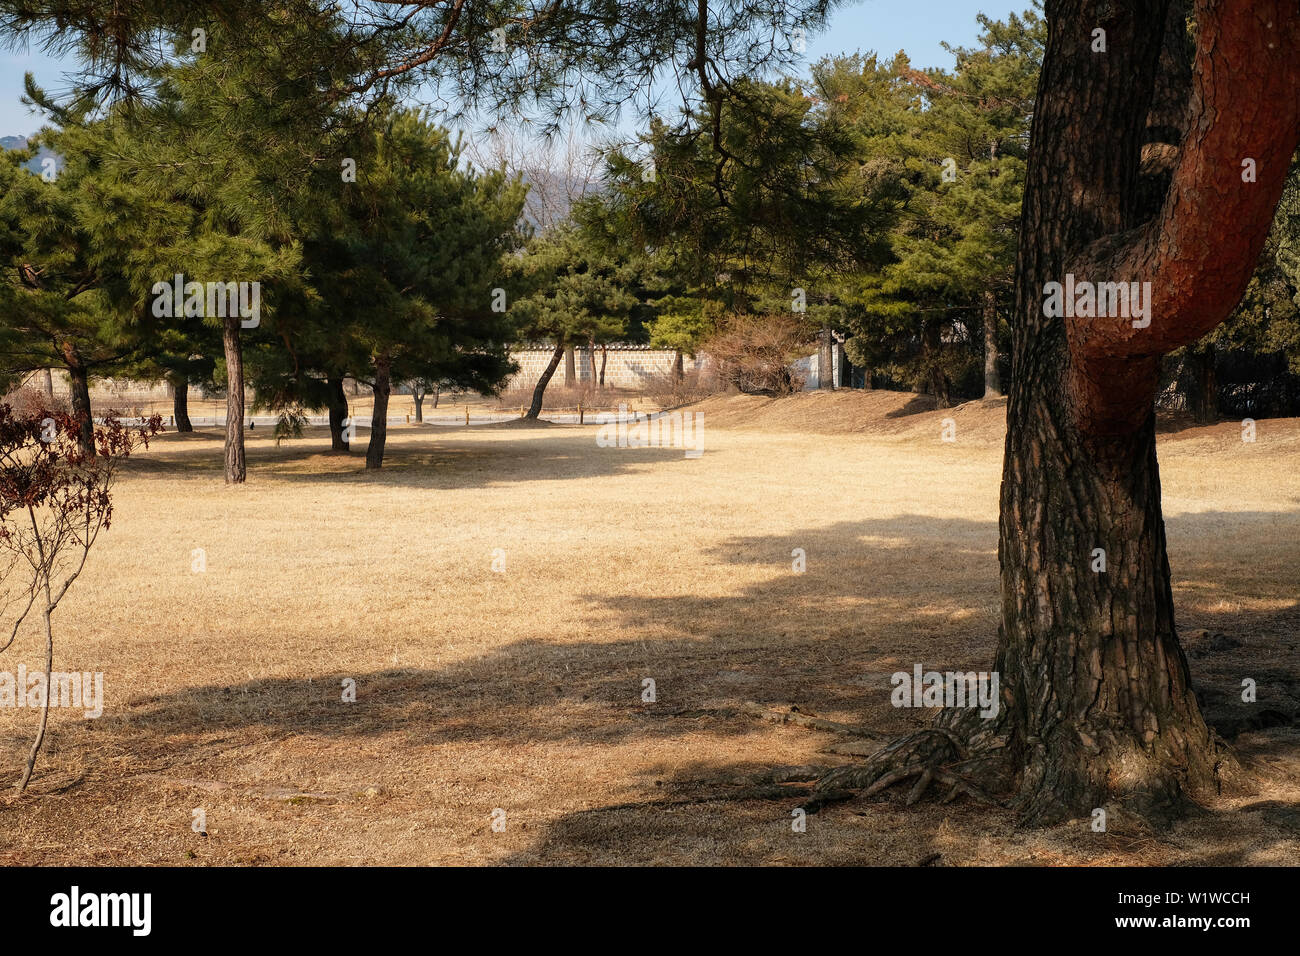 Tranquil scene of under tree shade and dry lawn with pine forest background Stock Photo